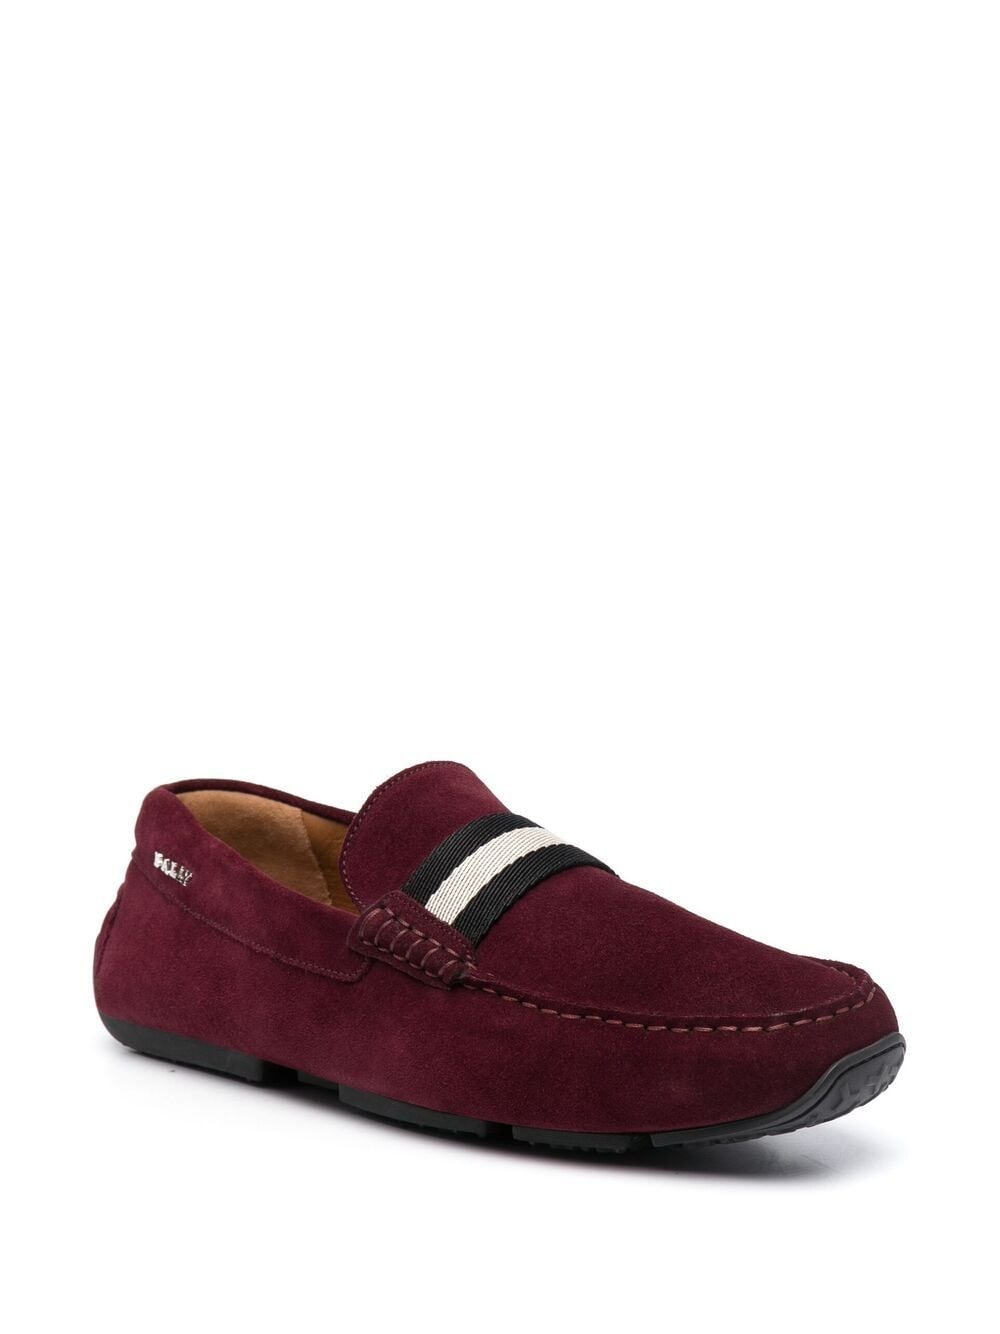 Bally Pearce Suede Loafers - Farfetch